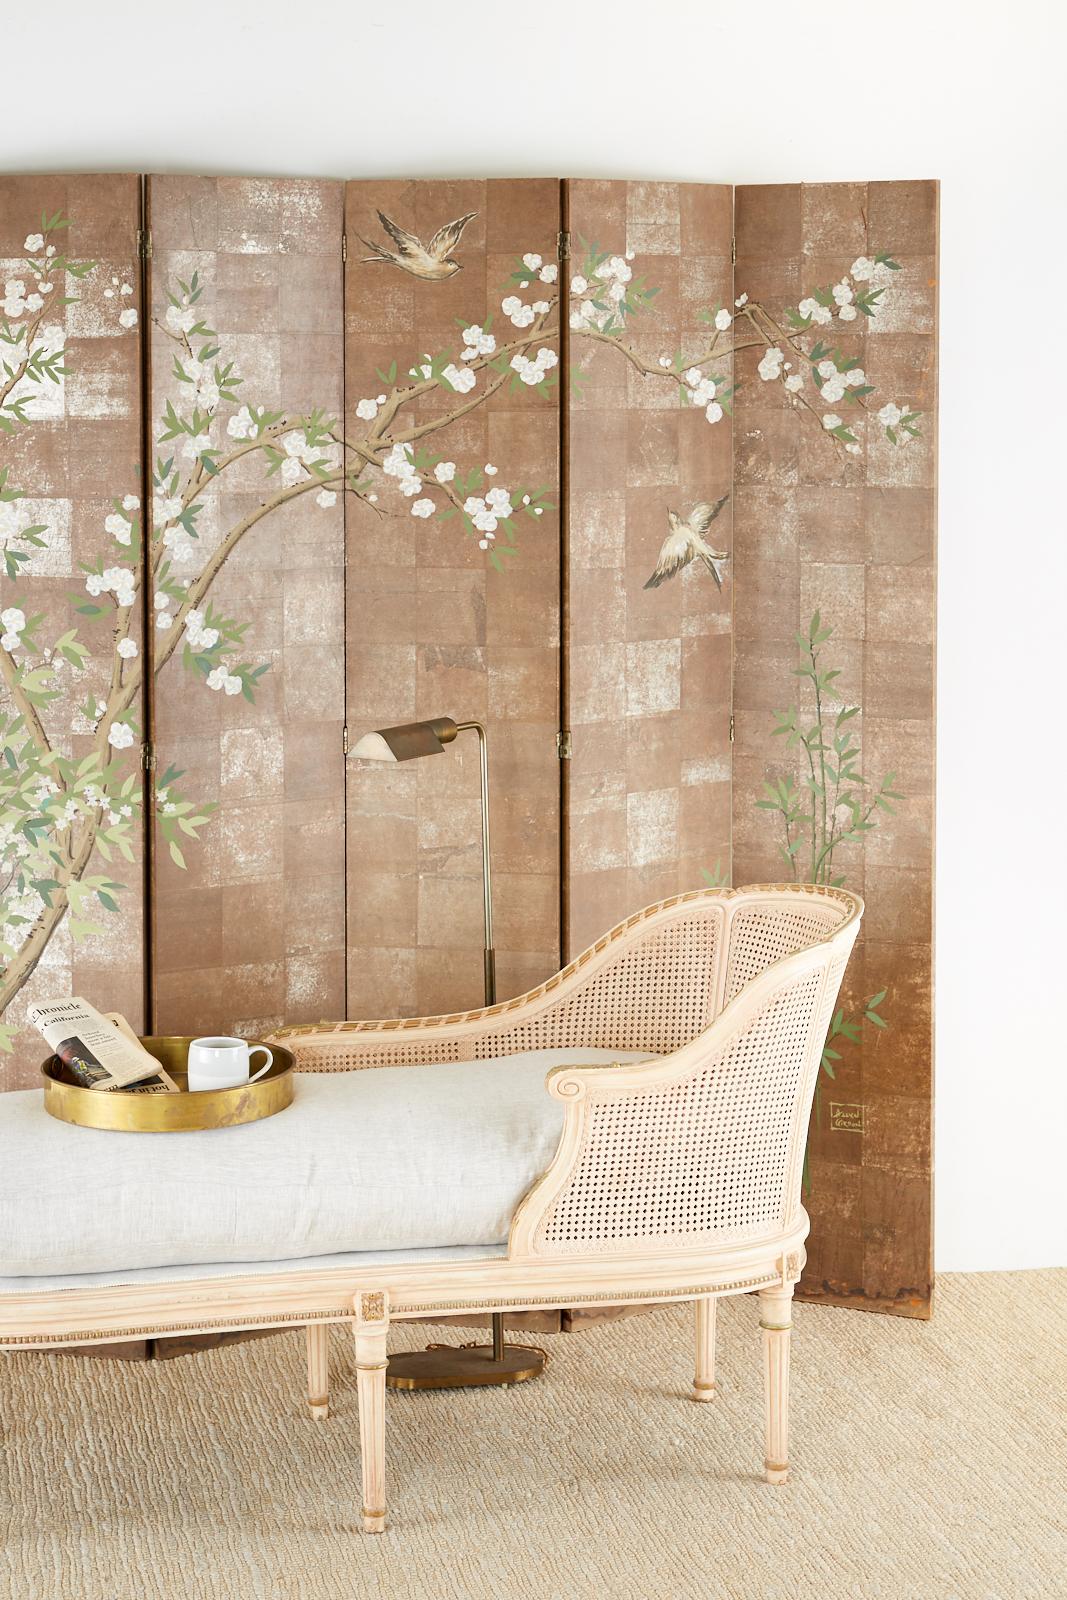 Fantastic chinoiserie style six-panel folding screen featuring a blossoming prunus tree with white flowers painted over faded silver leaf squares. Painted by Charles Allyn Gordon (American 1909-1978) in the manner and style of Robert Crowder. Signed